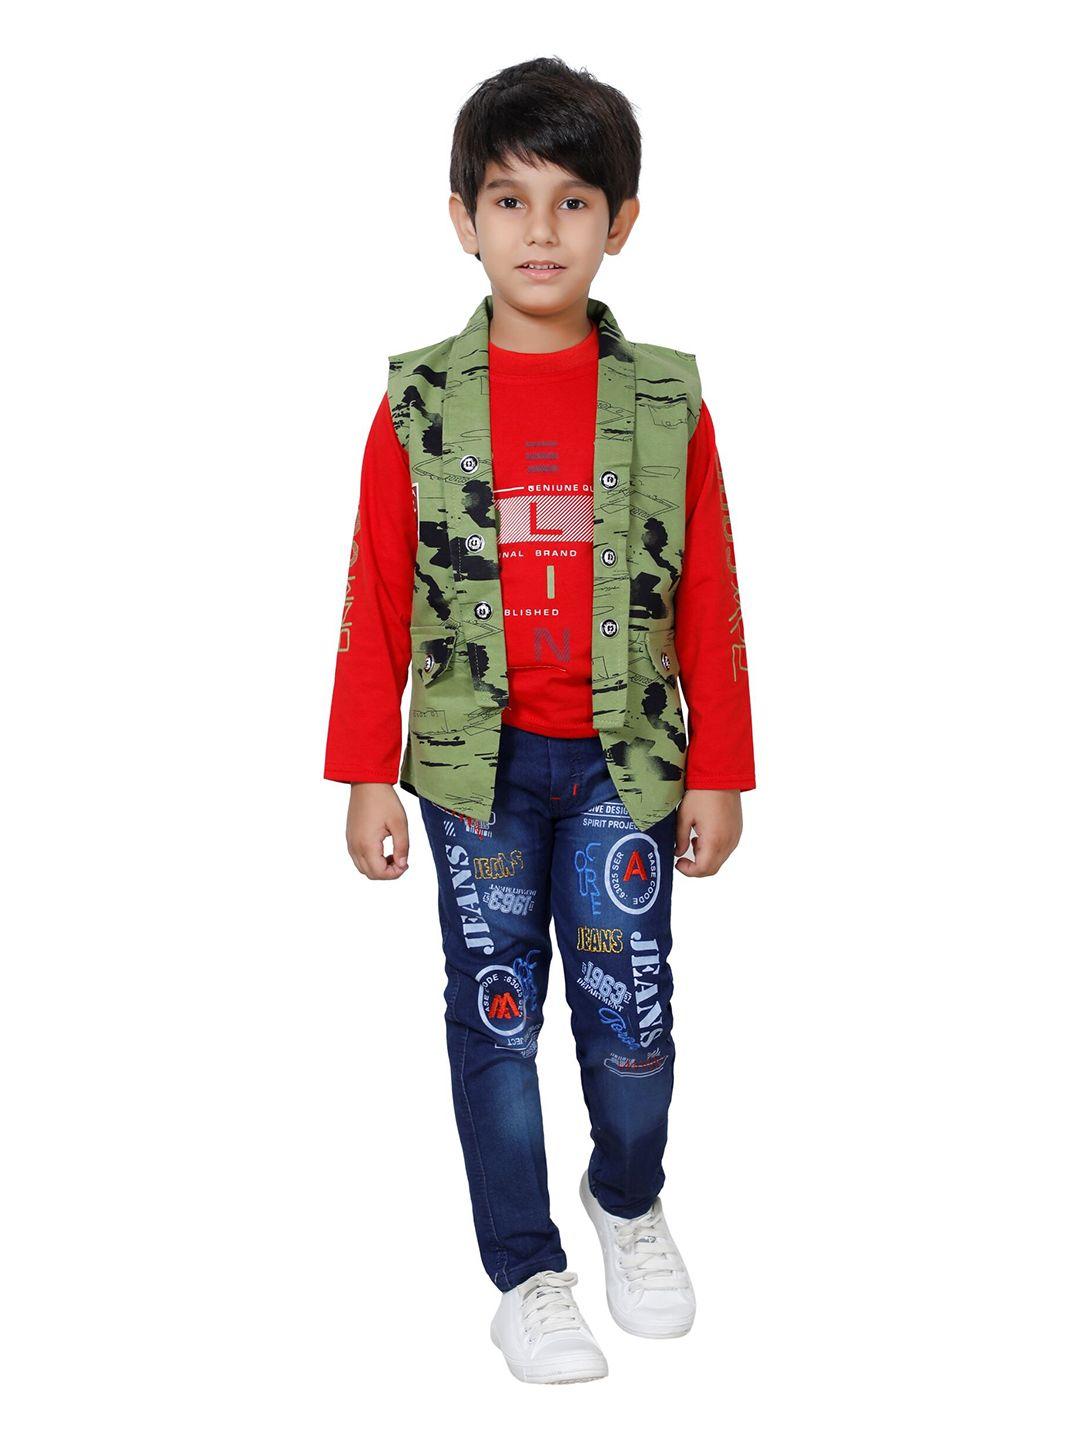 dkgf fashion boys red & olive green printed t-shirt with trousers